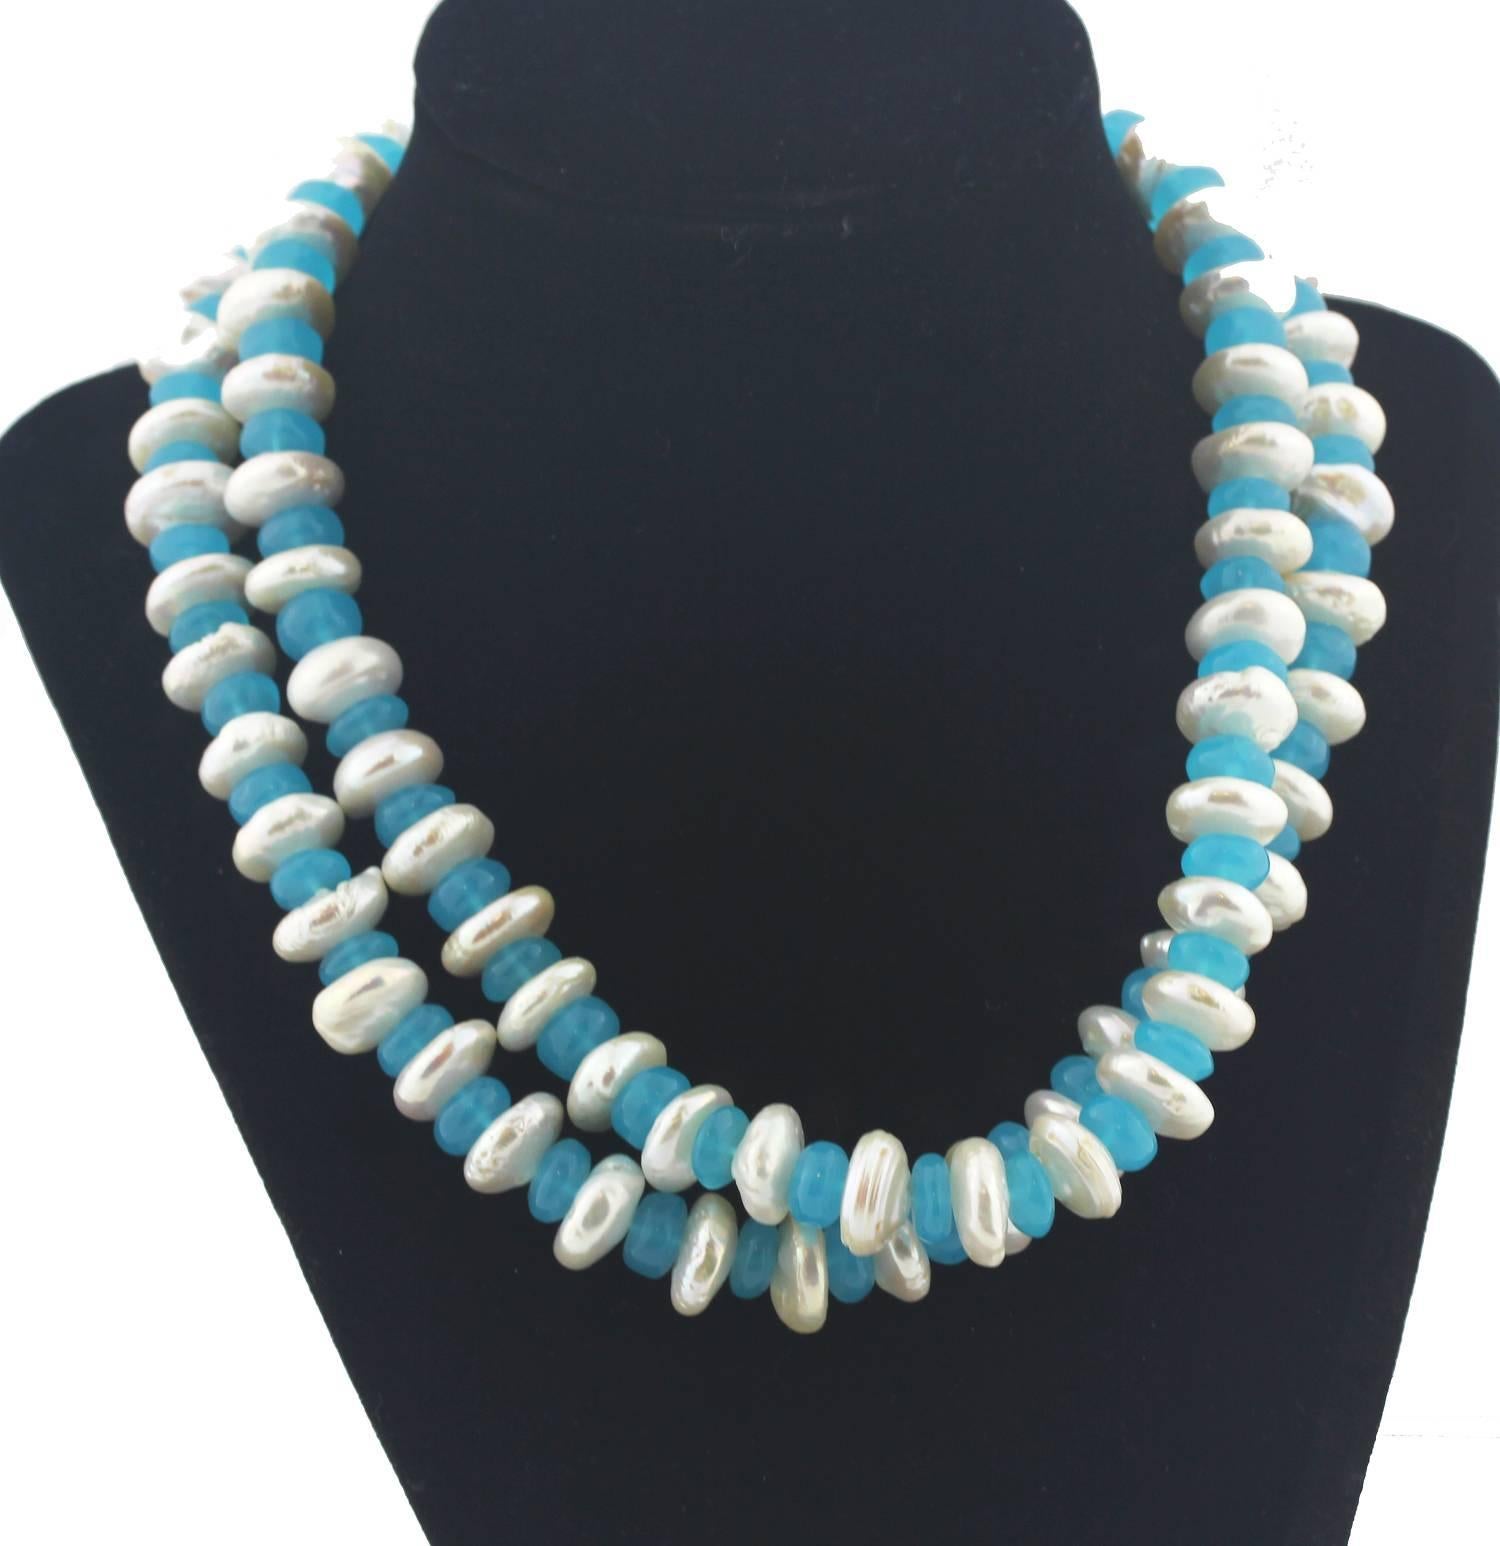 A double strand of highly polished unique glowing translucent Blue Chalcedony rondels enhanced with rondels of natural imperfect Ocean Pearls on this handmade necklace.  Size:  Pearls vary slightly but are approximately 14 mm;  Length:  17.25